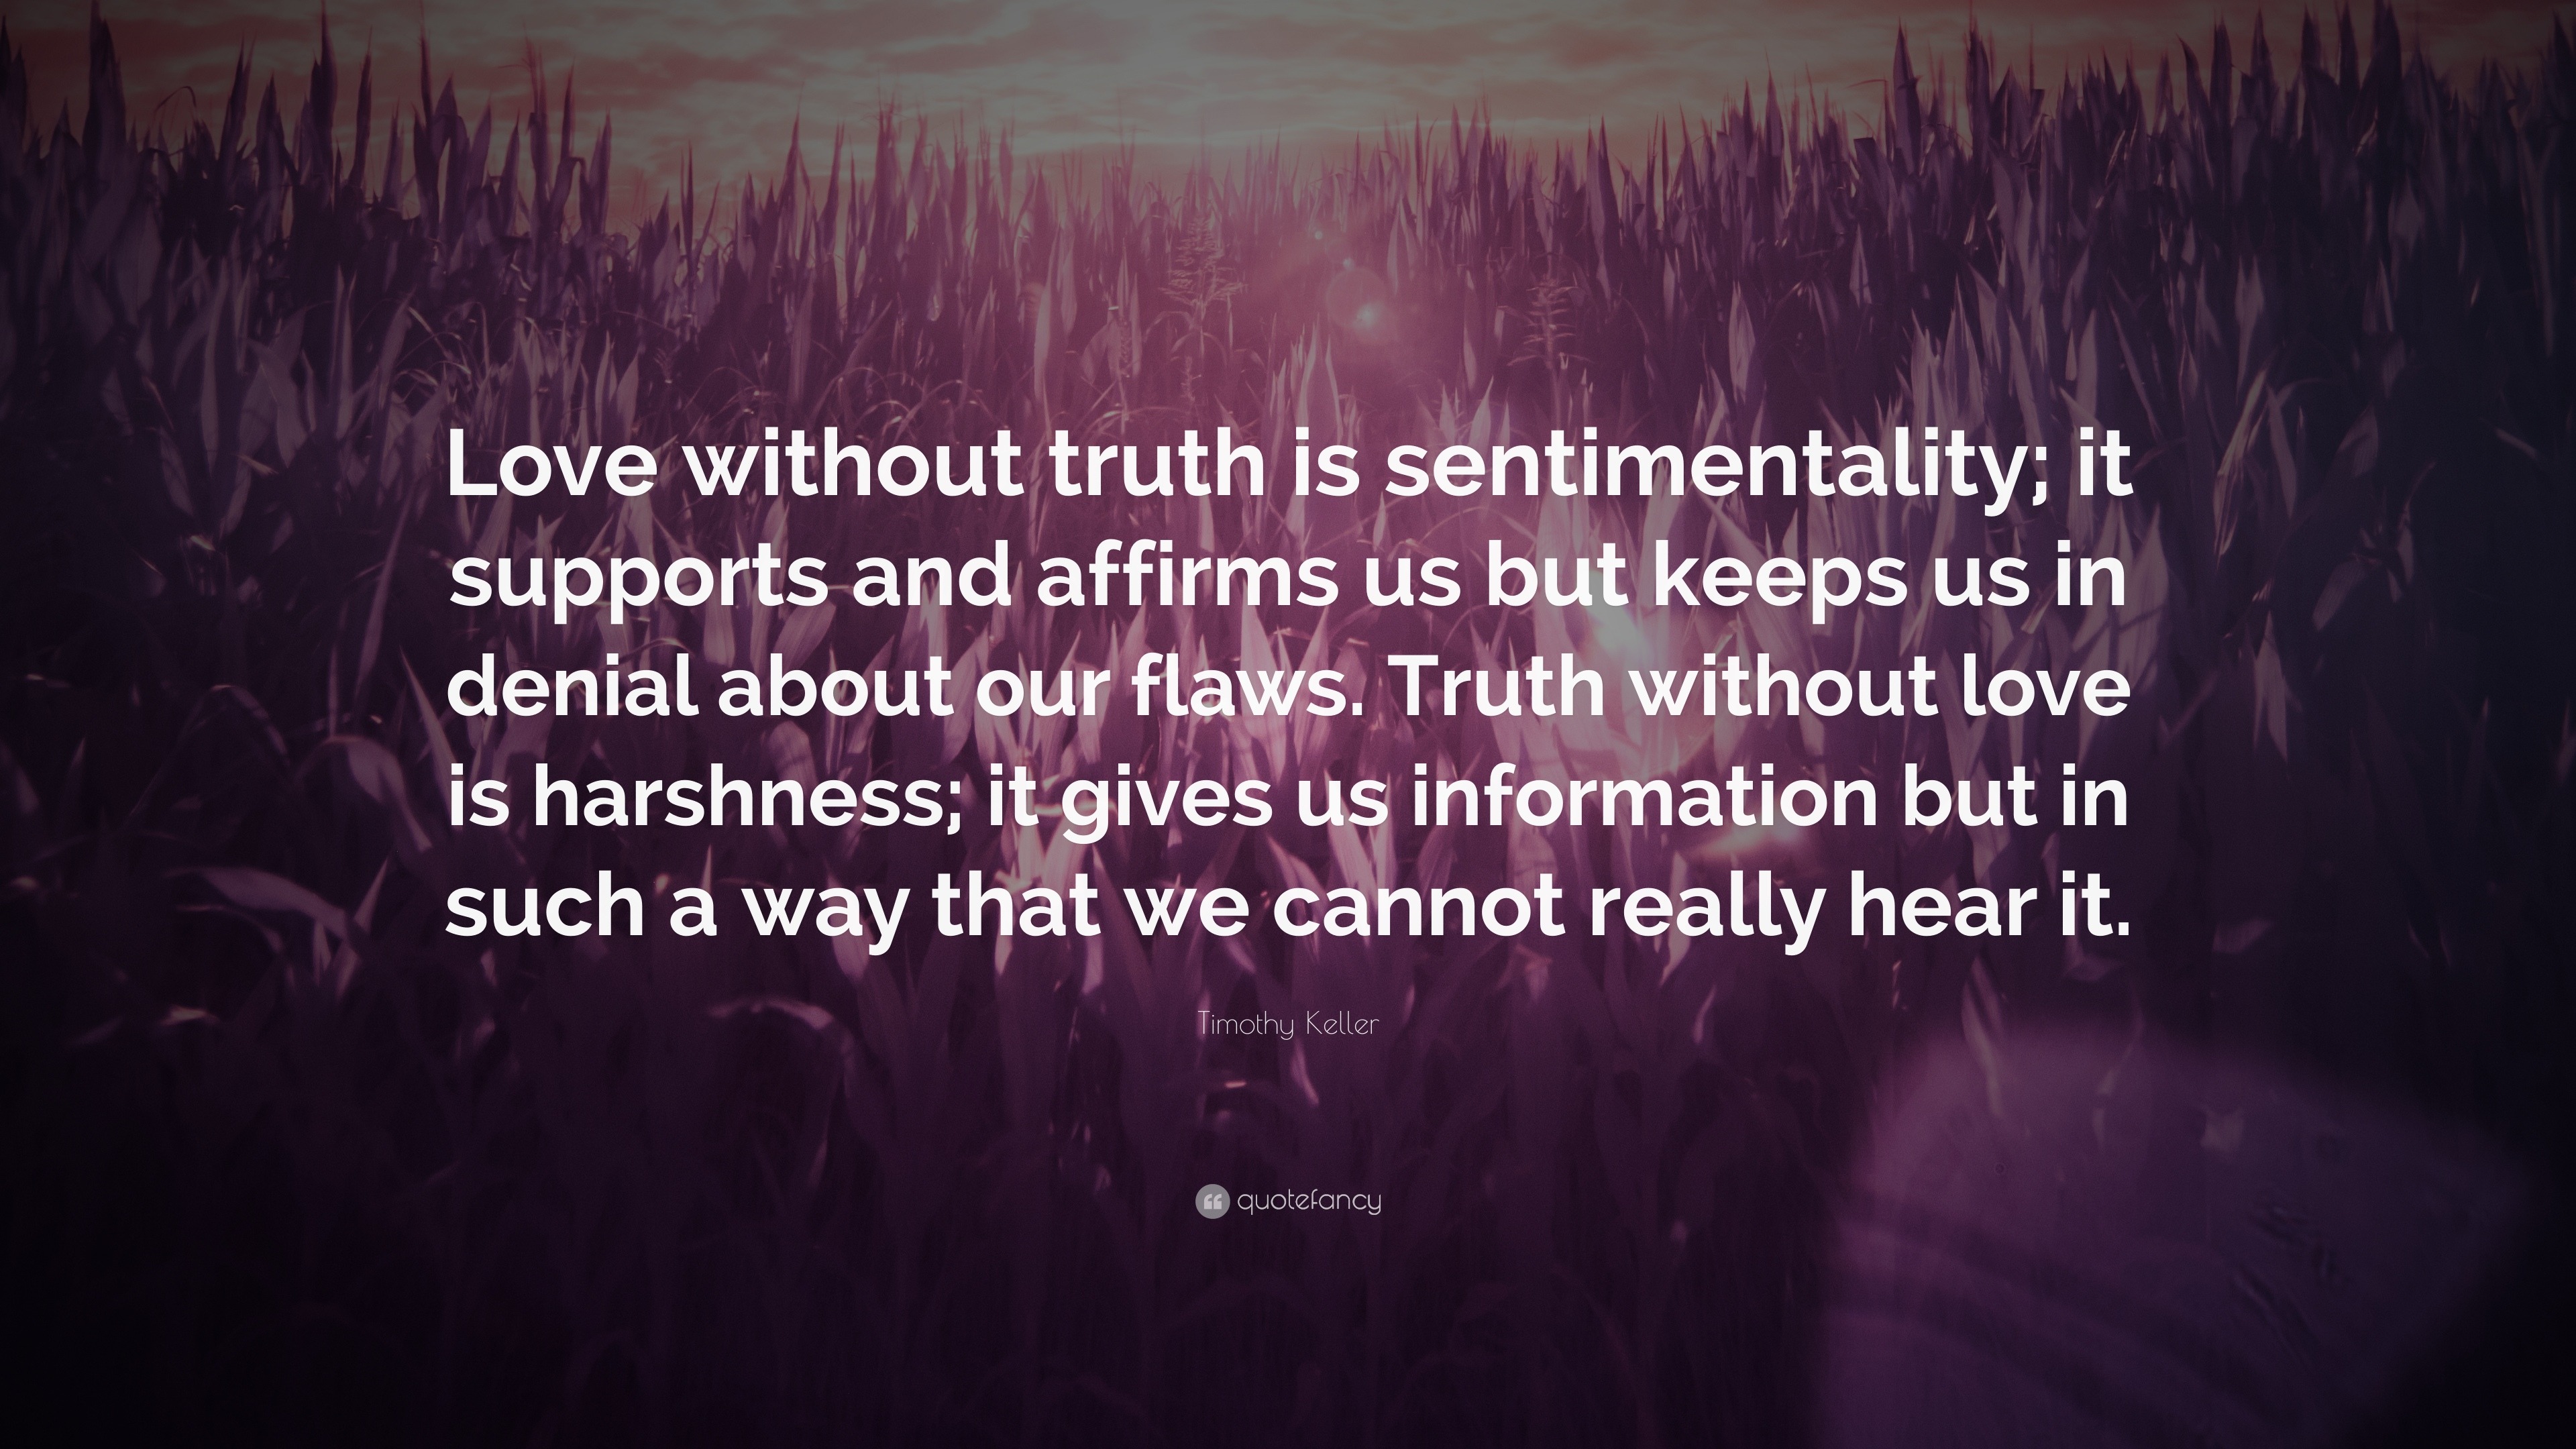 Timothy Keller Quote “Love without truth is sentimentality it supports and affirms us